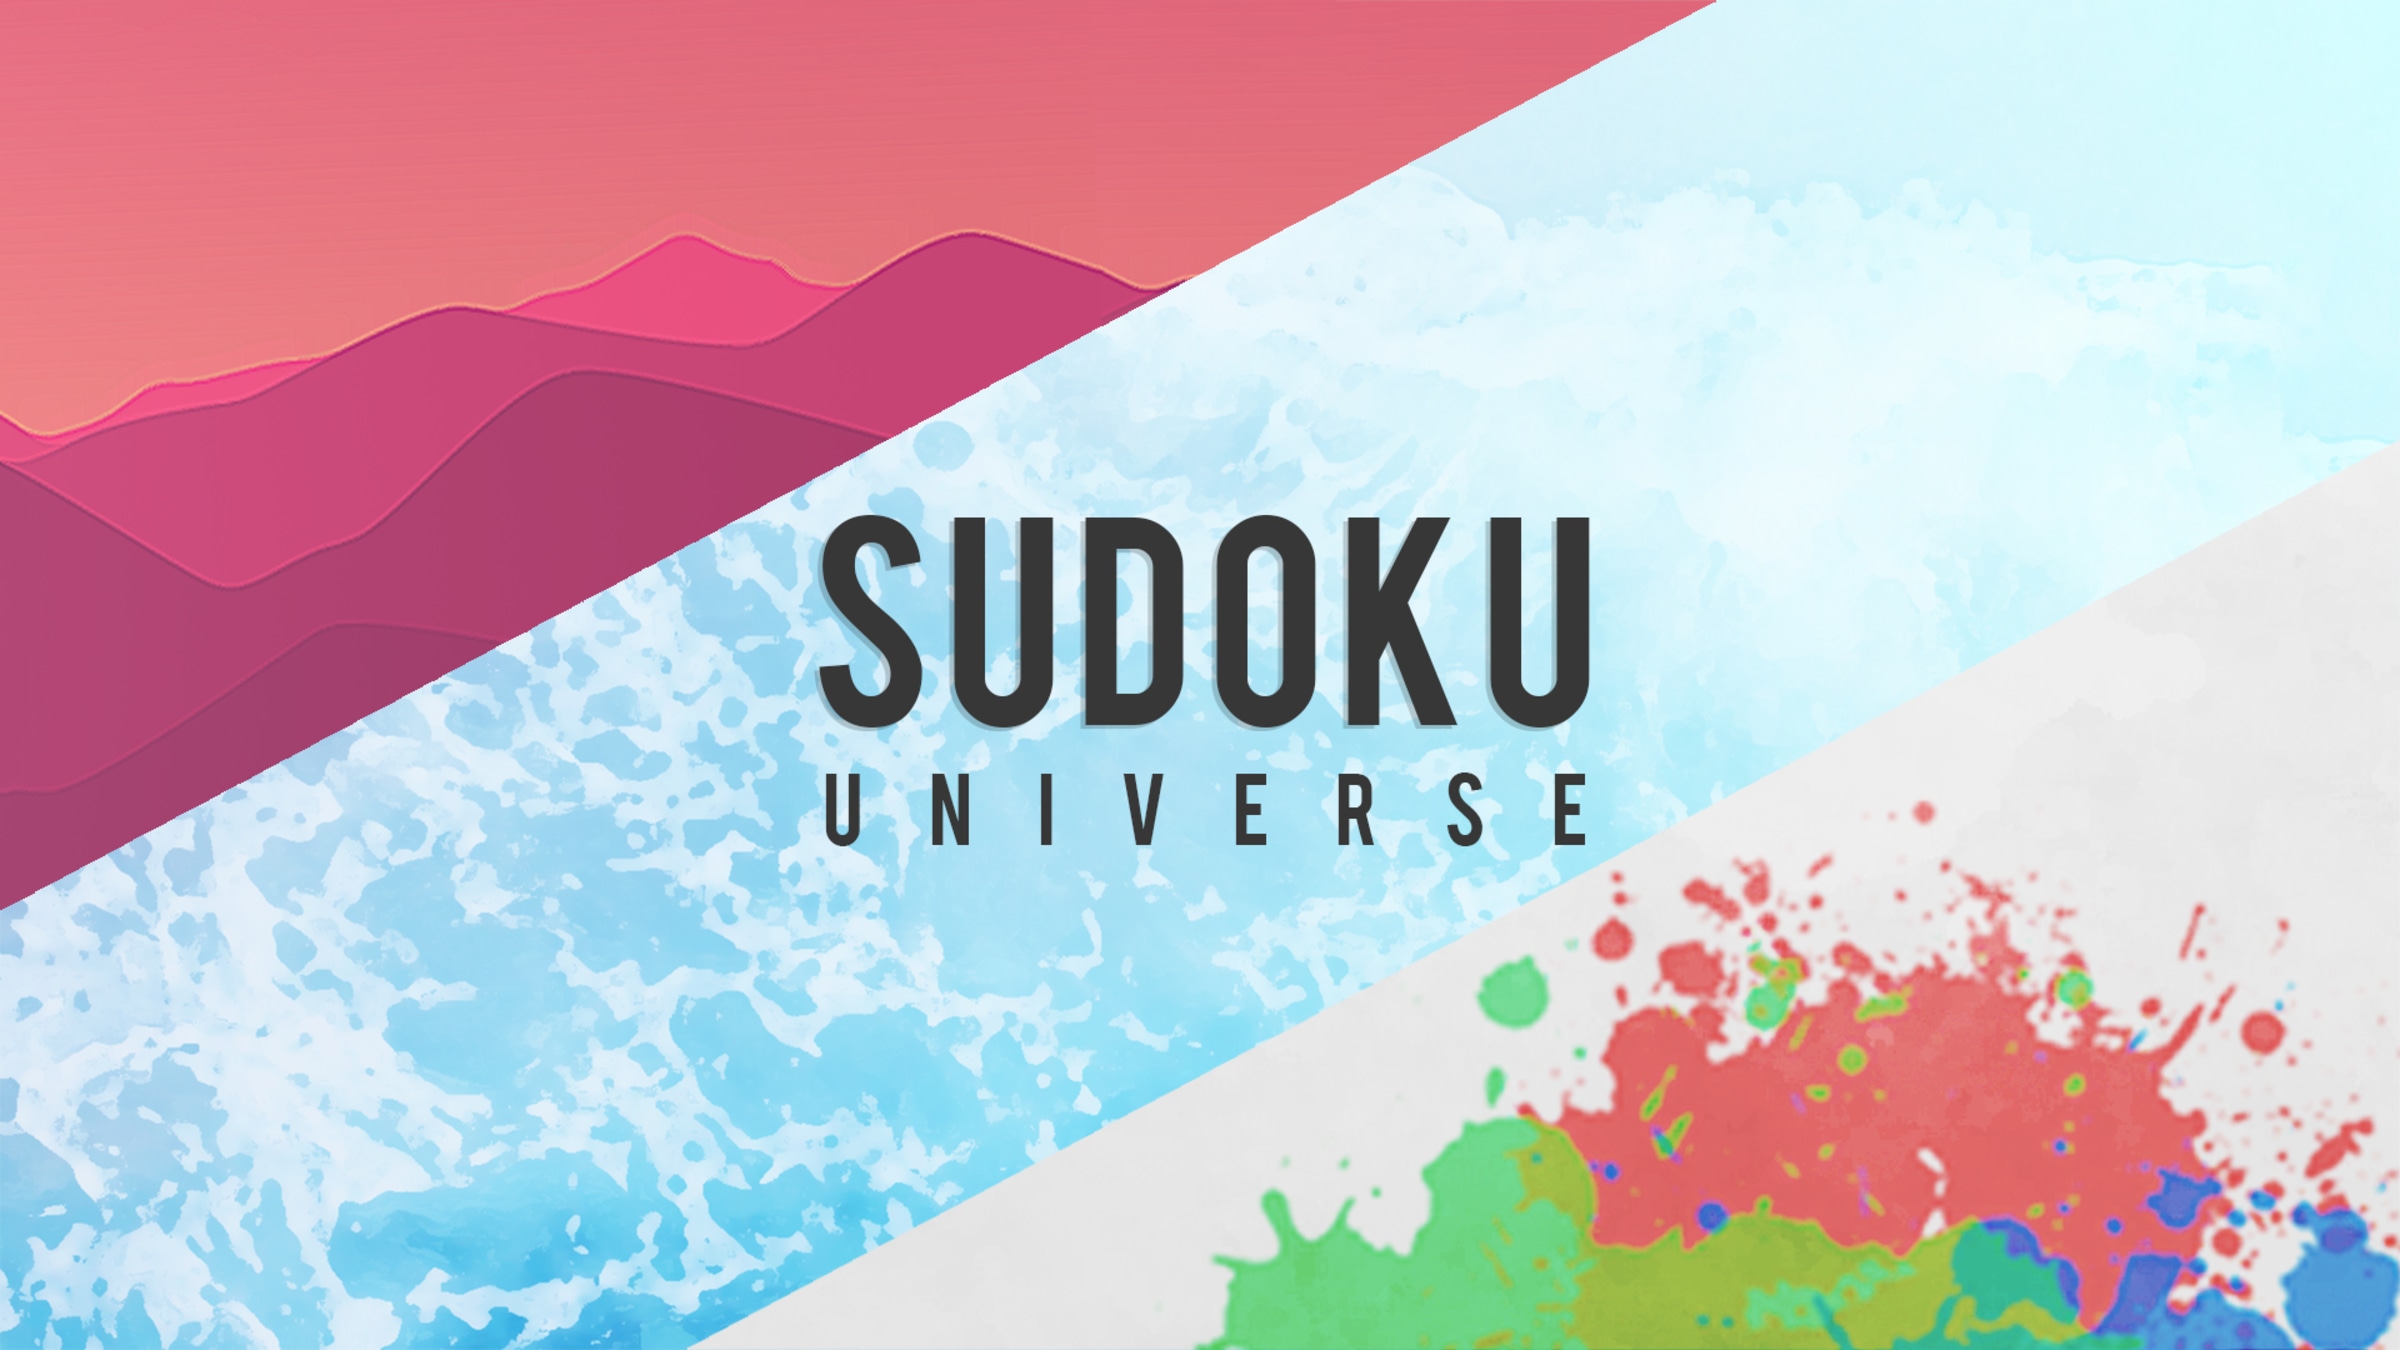 Sudoku: Casual Board Game for Nintendo Switch - Nintendo Official Site